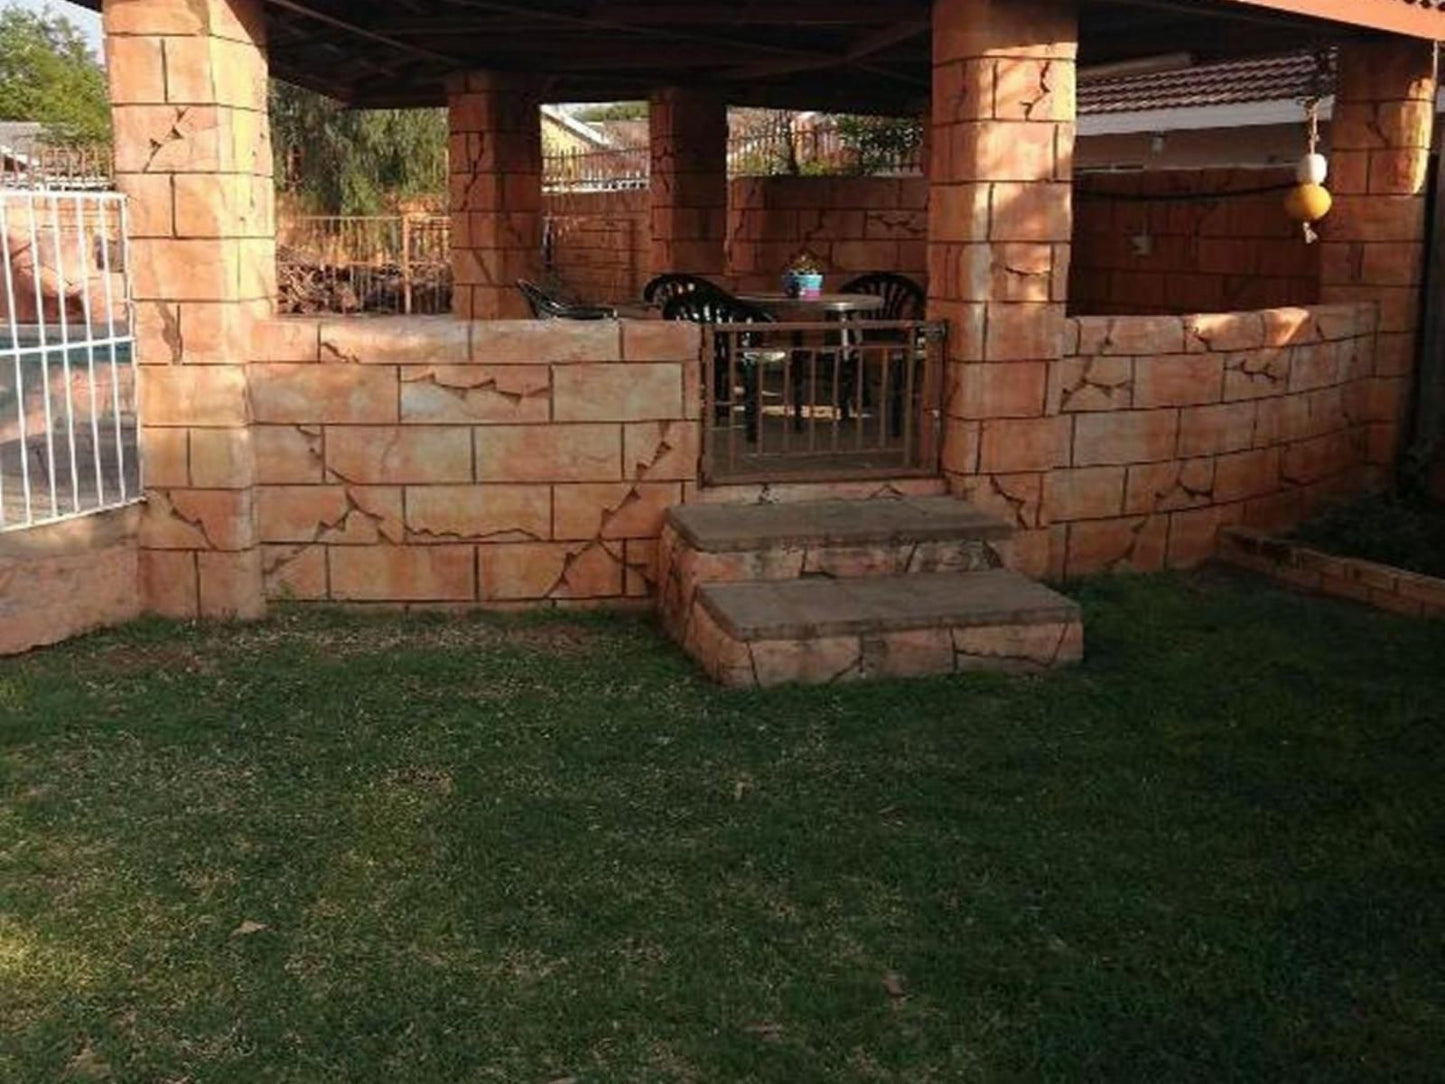 Midway Overnight Rooms Monument Heights Kimberley Northern Cape South Africa Brick Texture, Texture